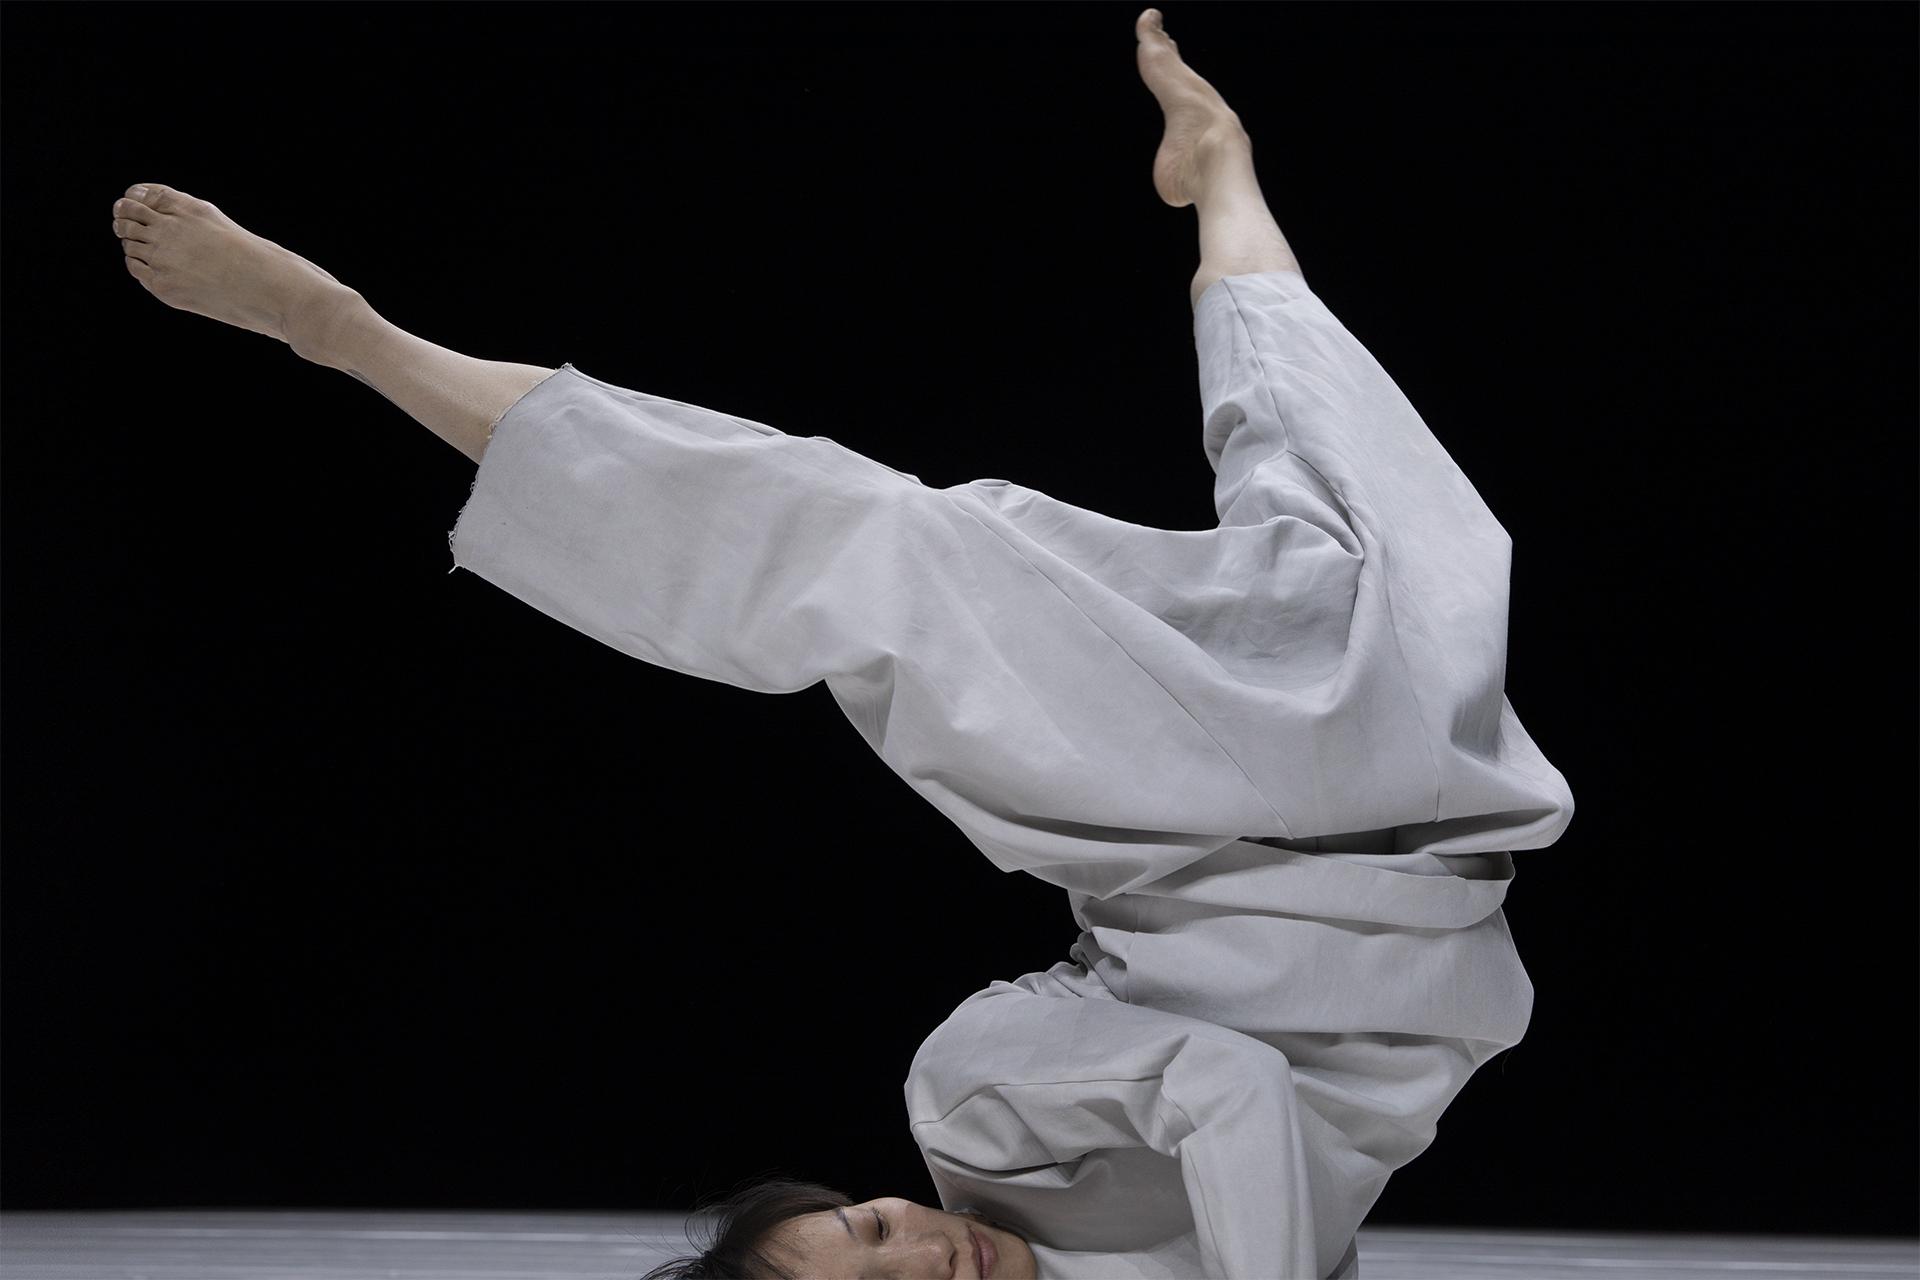 Dancer doing a headstand, in a grey ensemble